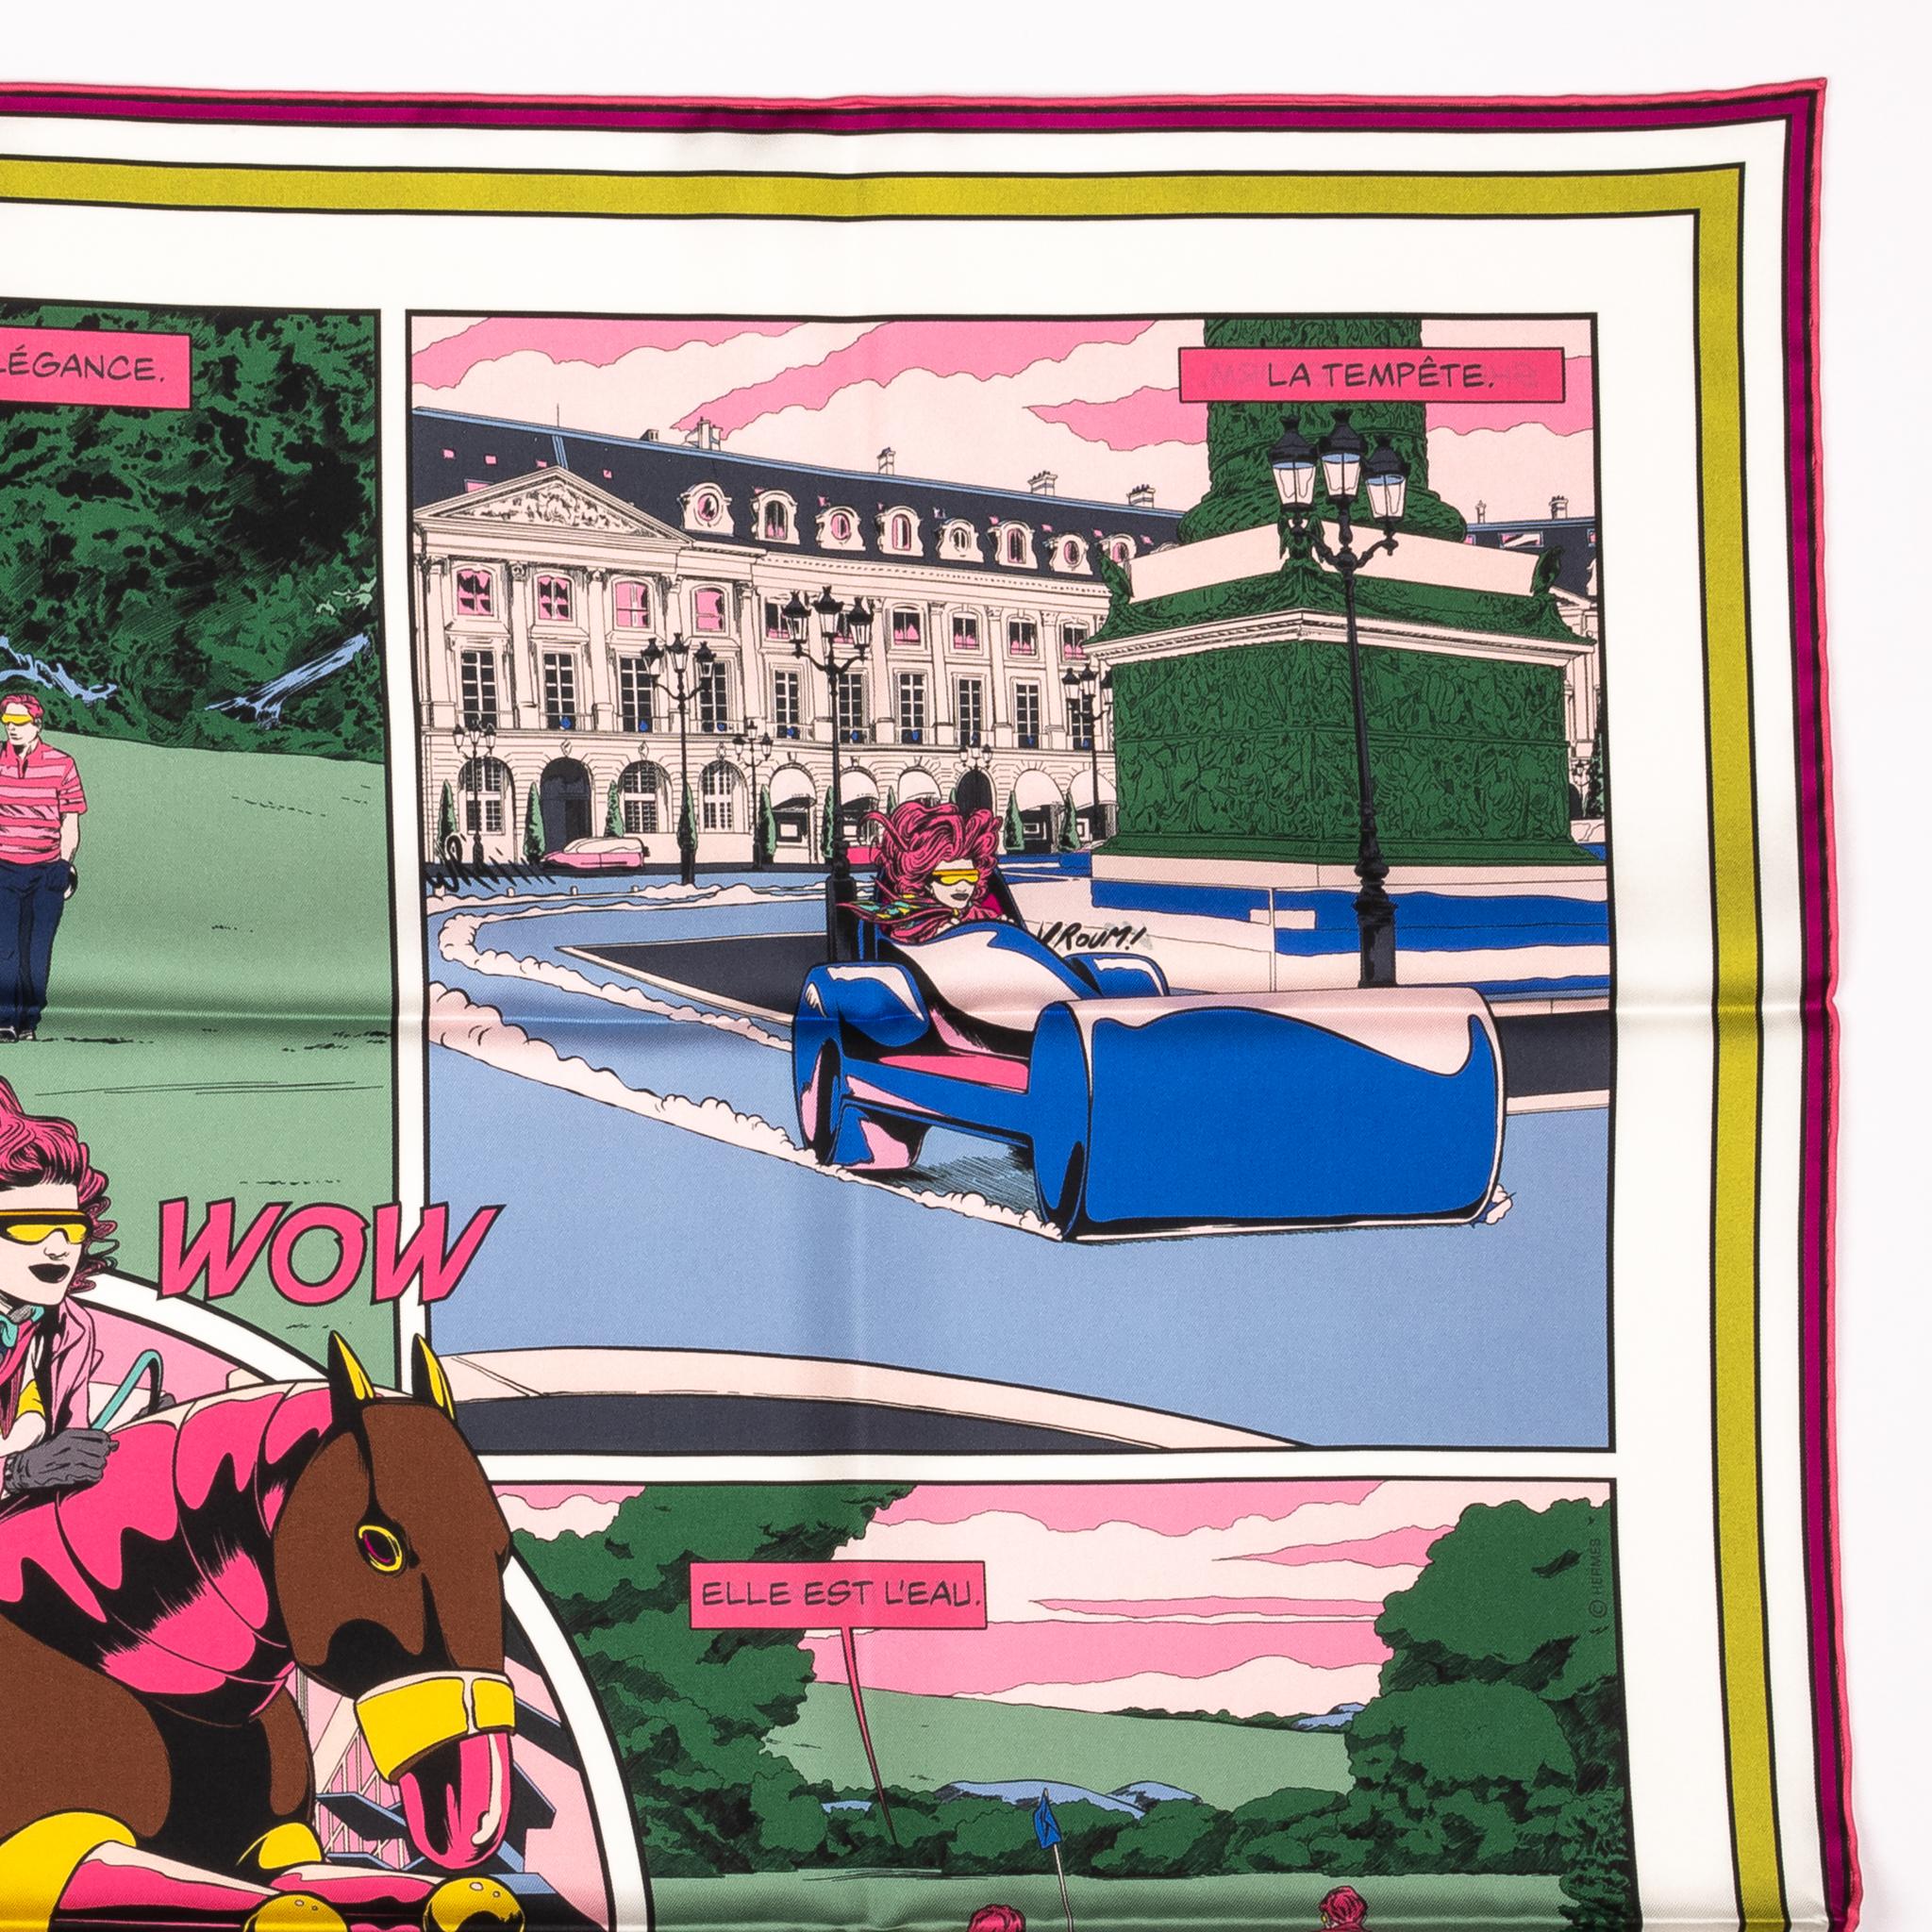 Hermes double face comics silk scarf. One side in english and one side in french. Brand new with original box.